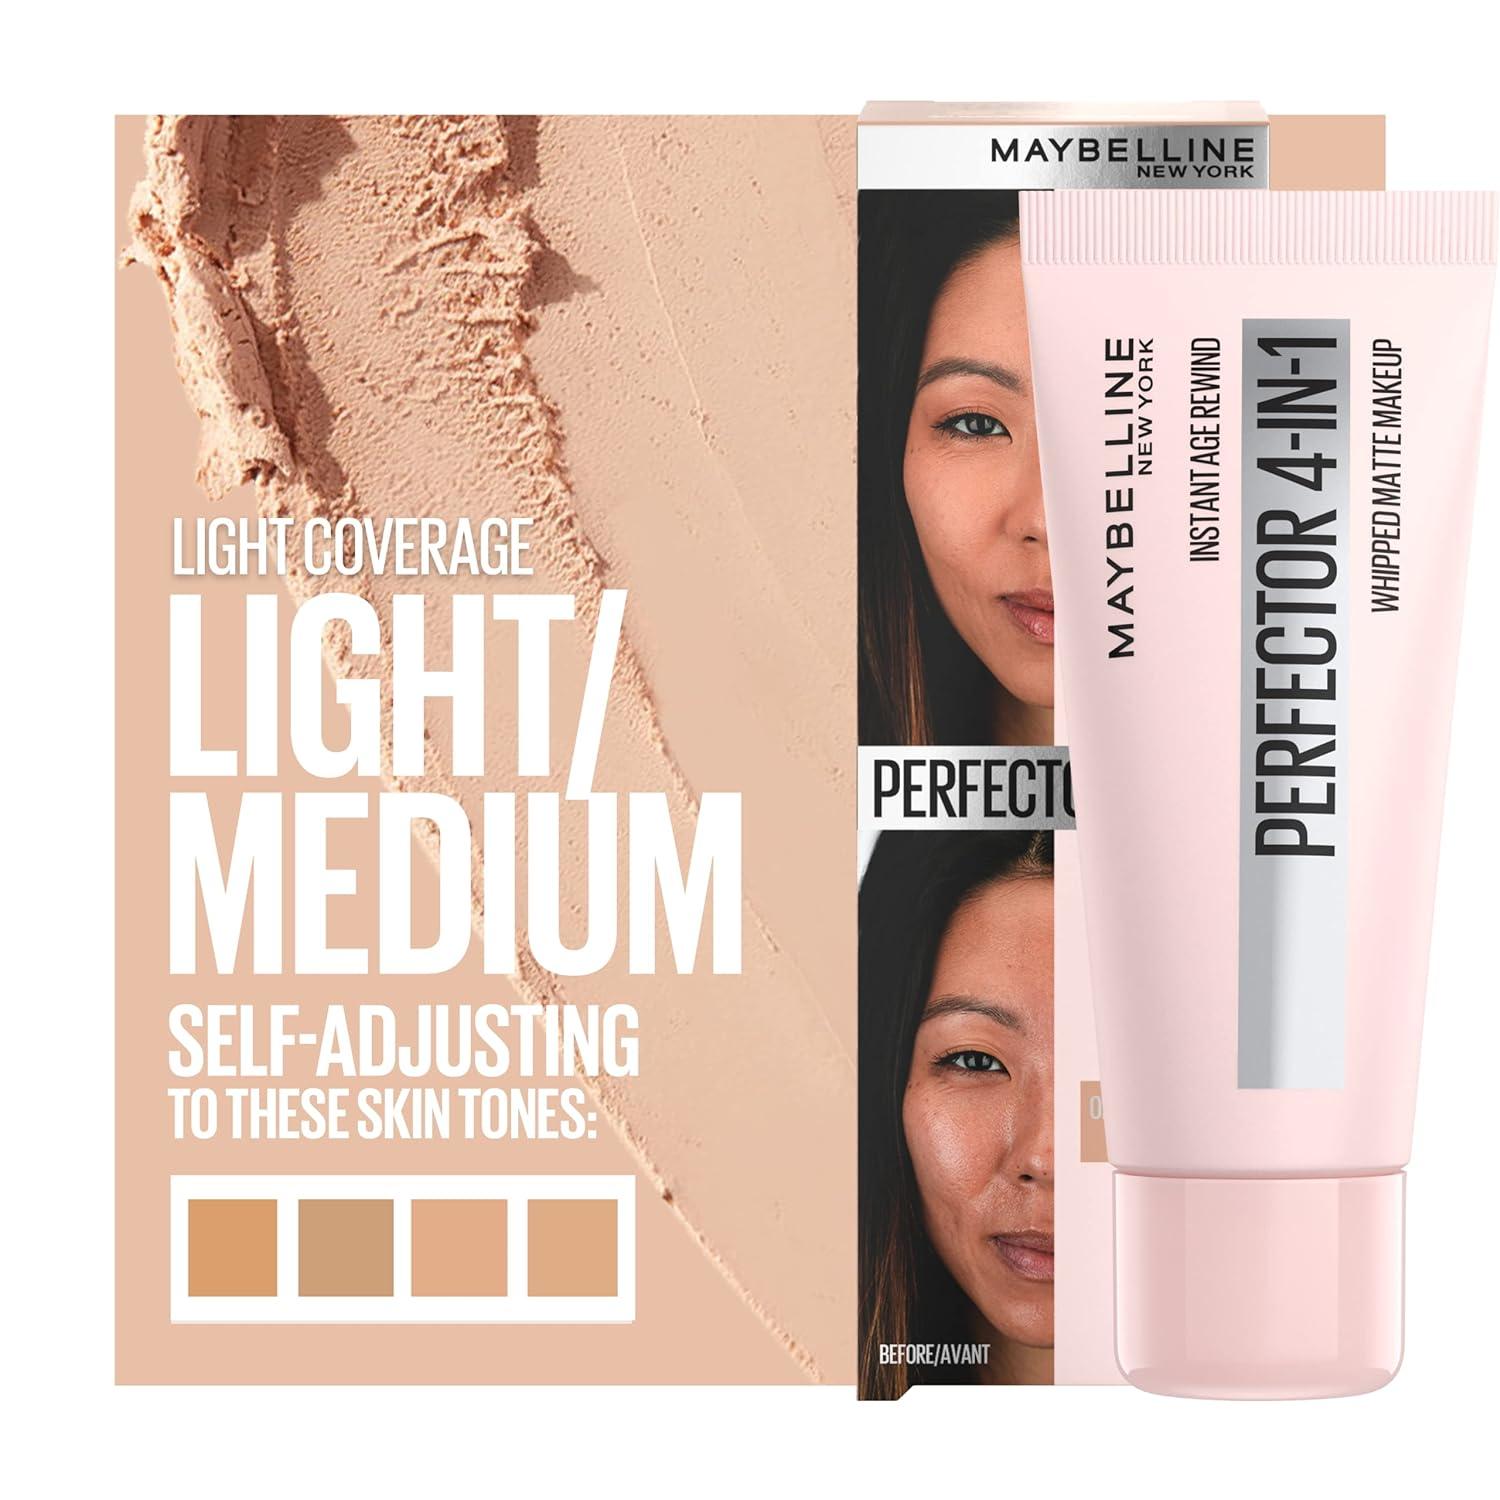 Maybelline New 1 Perfector Light/Medium Instant 02 Age York Rewind Instant Makeup 4-In-1 Matte Count